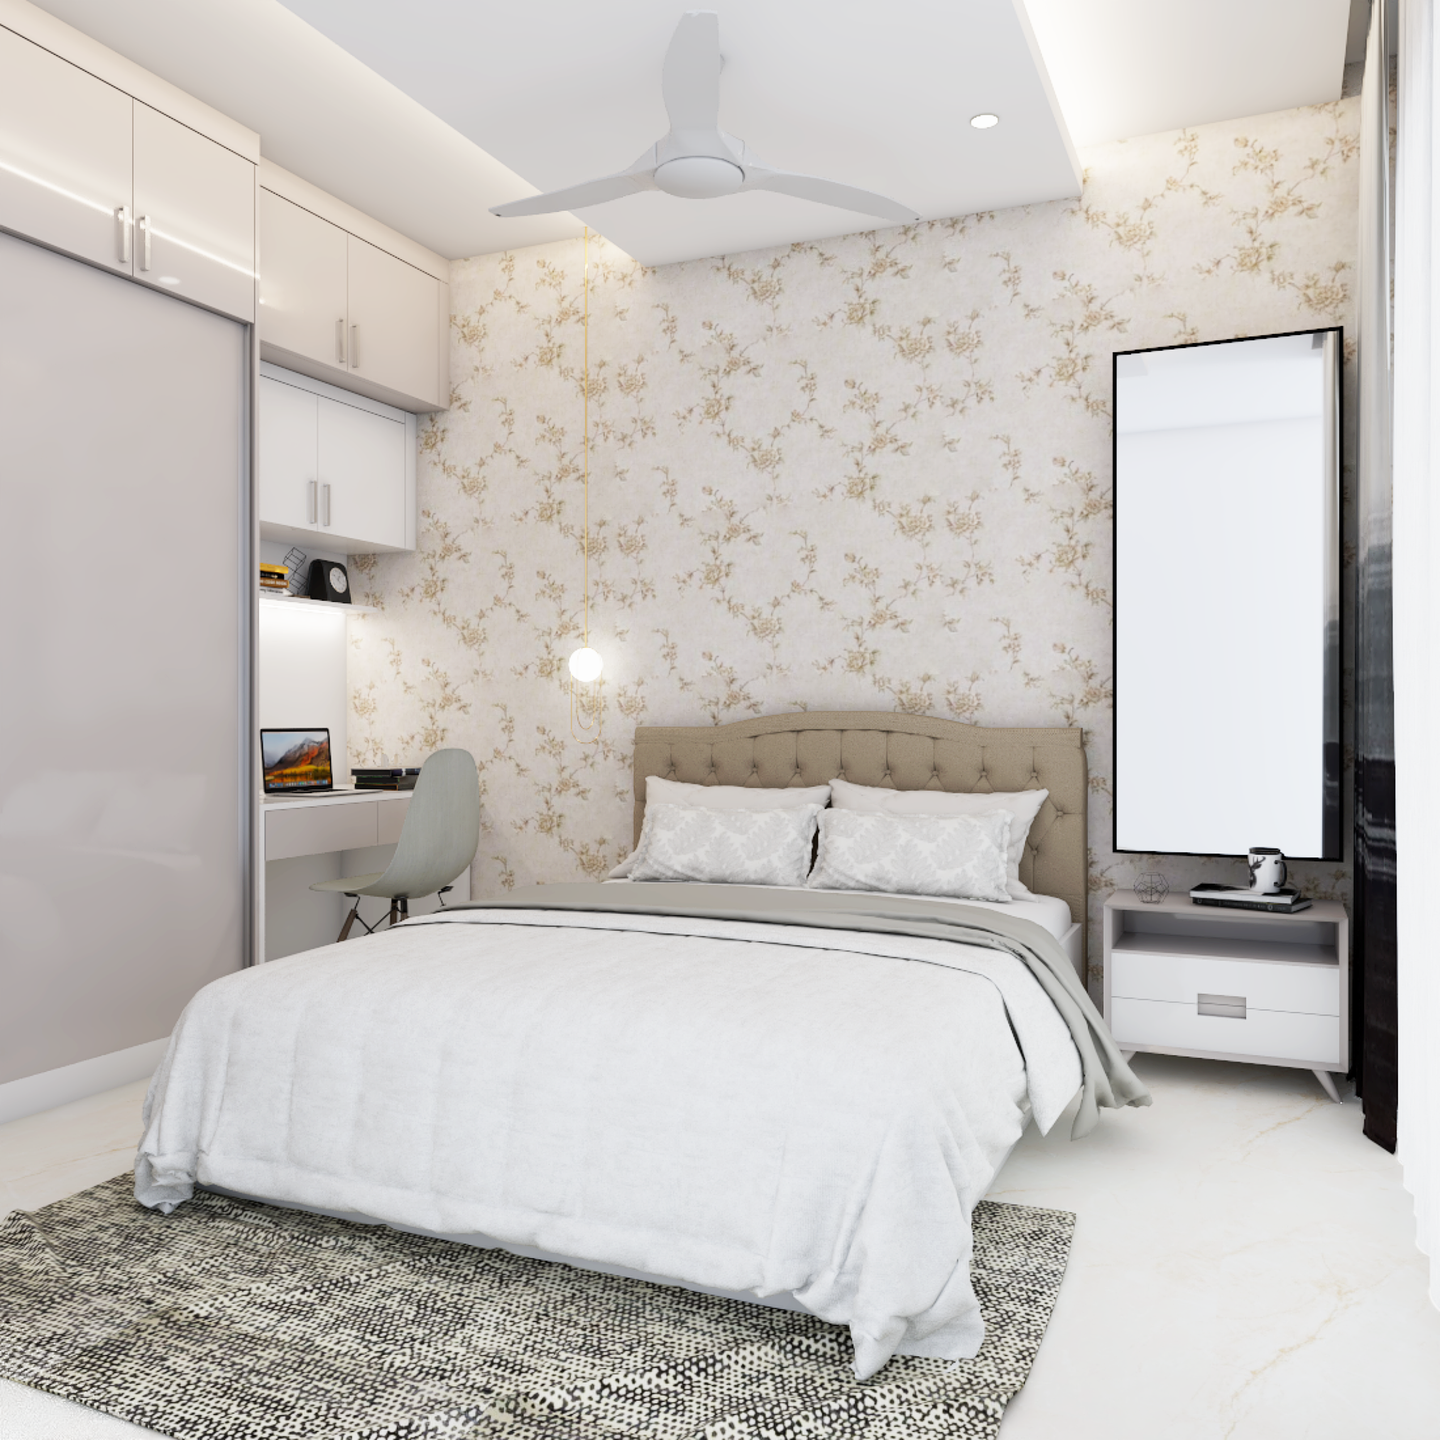 Bedroom Wallpaper In Shades Of Brown And White - Livspace